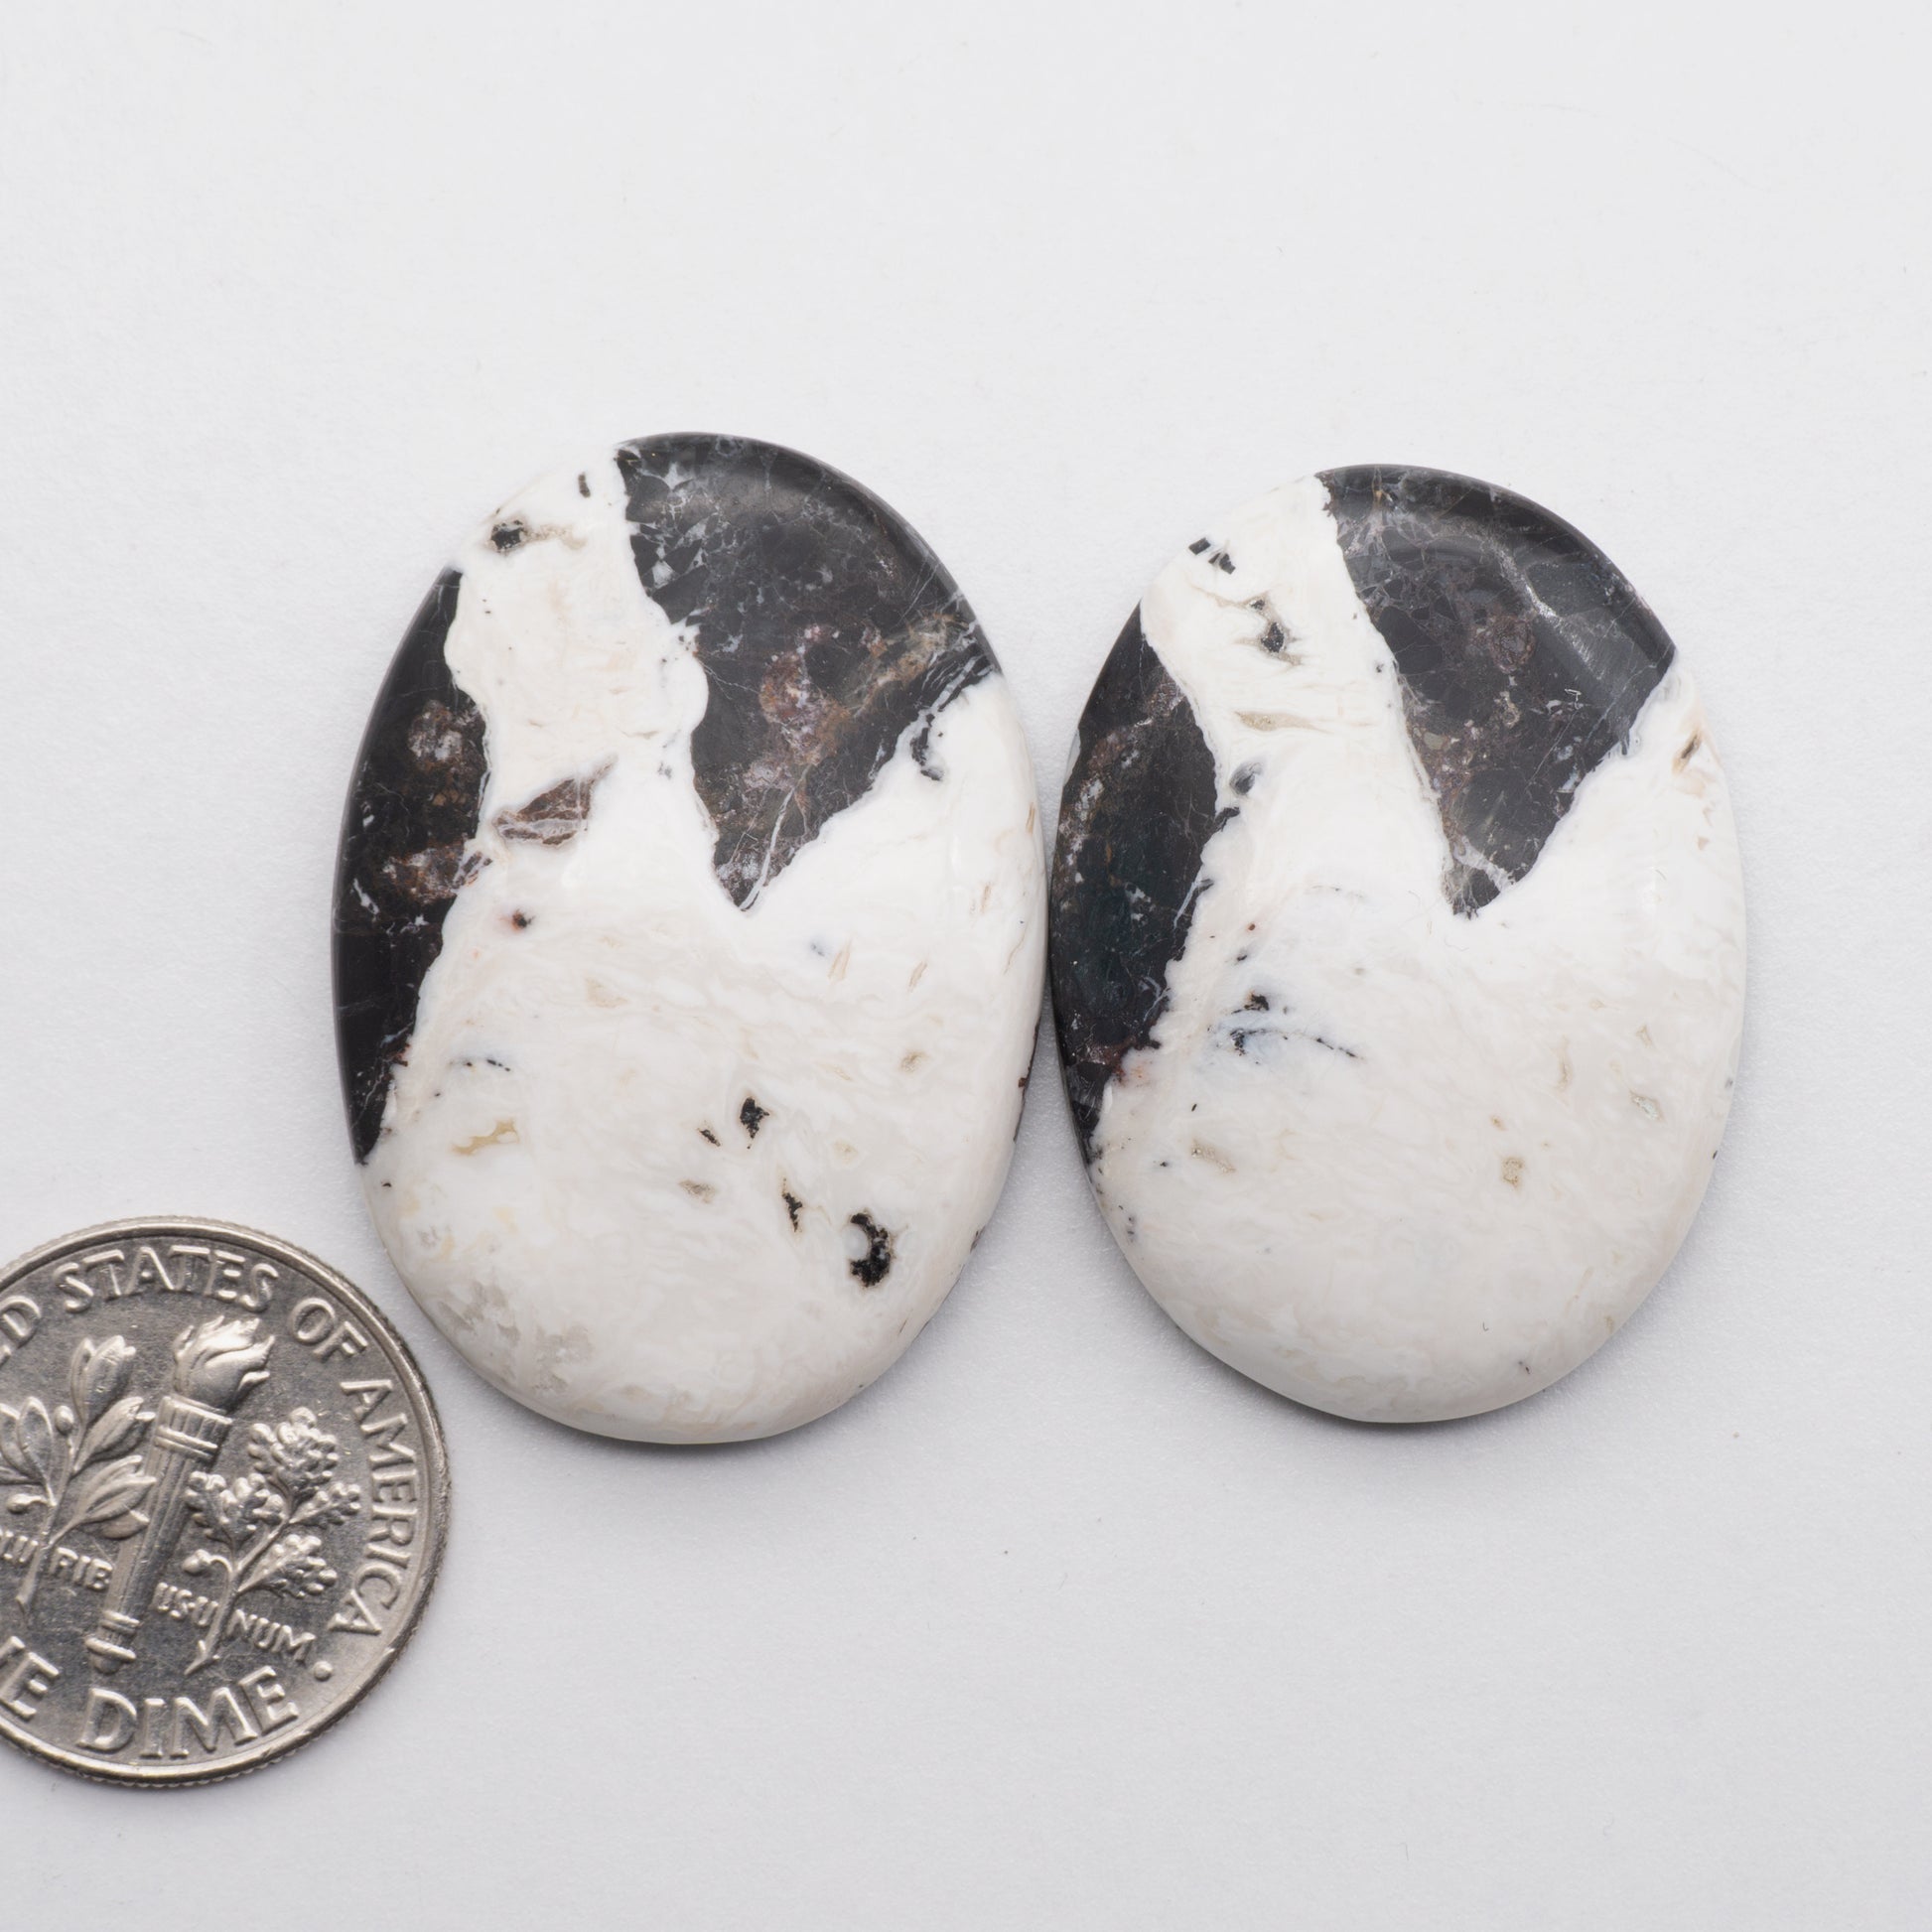 This Natural White Buffalo Cabochon has a glossy finish and is backed for added strength. Mined in Nevada, USA this stone is similar to turquoise, used for jewelry making.